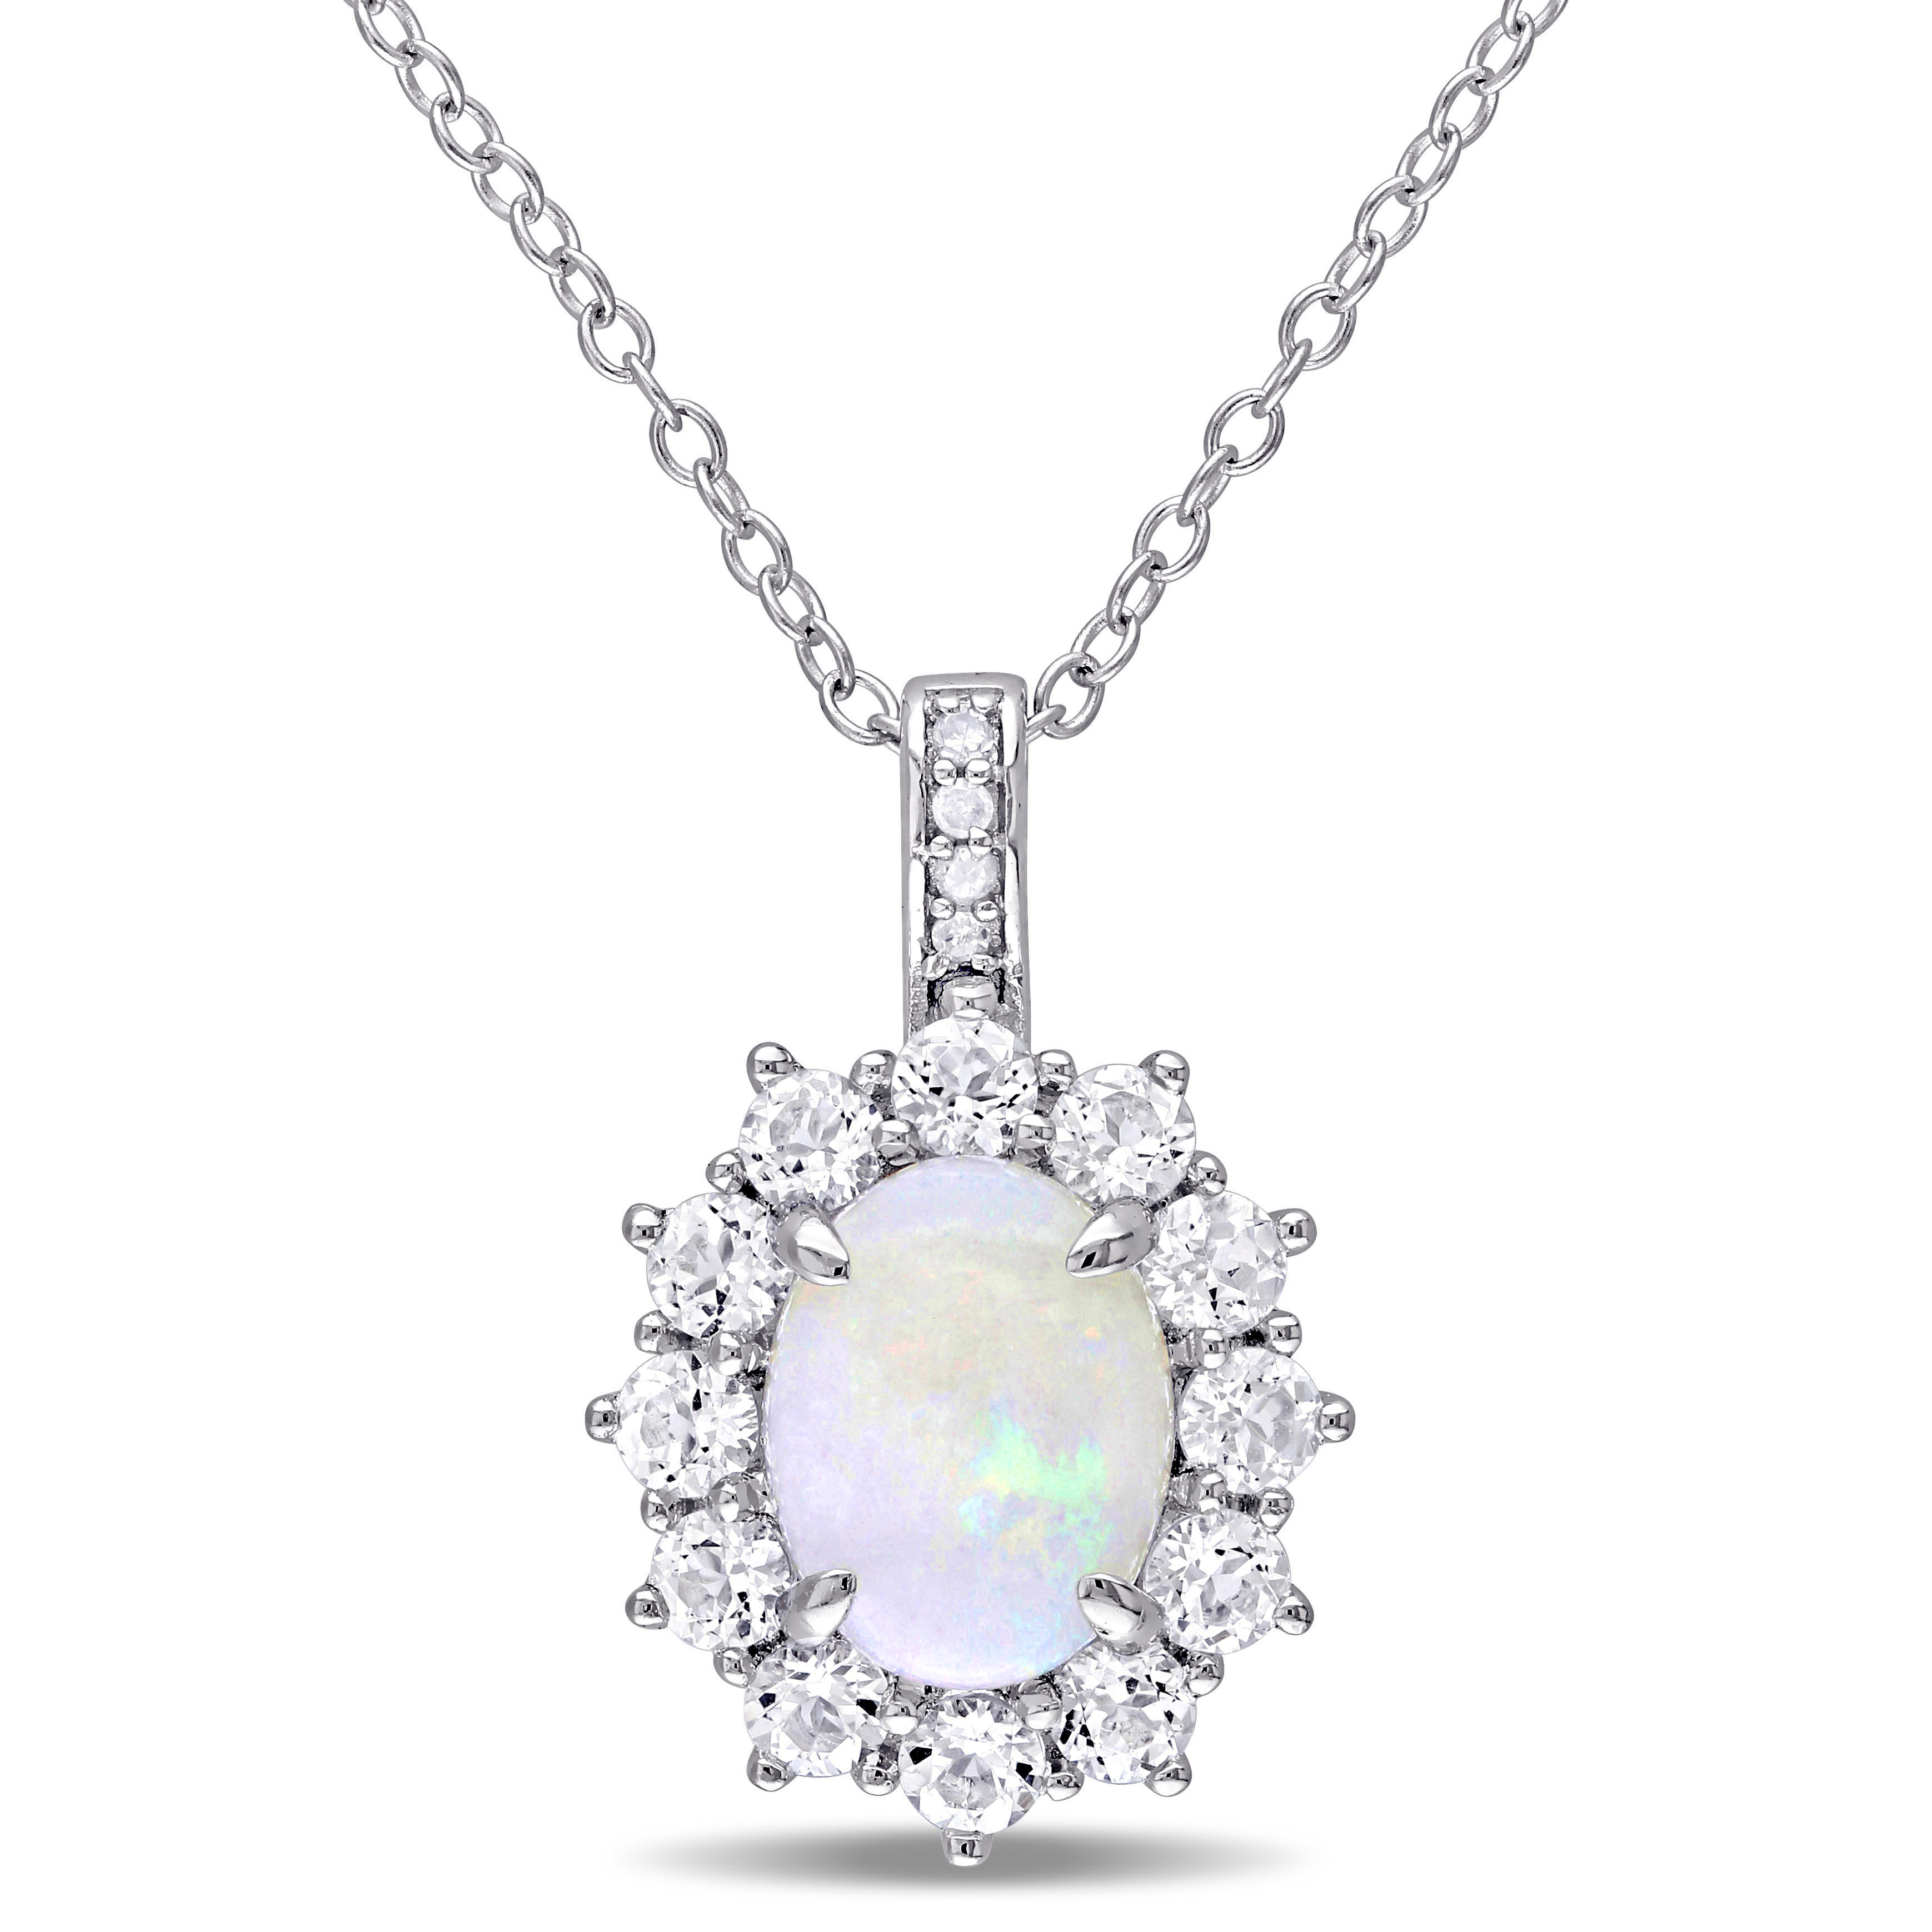 Opal, White Topaz and Diamond Halo Pendant with Chain in Sterling Silver - 18 in.